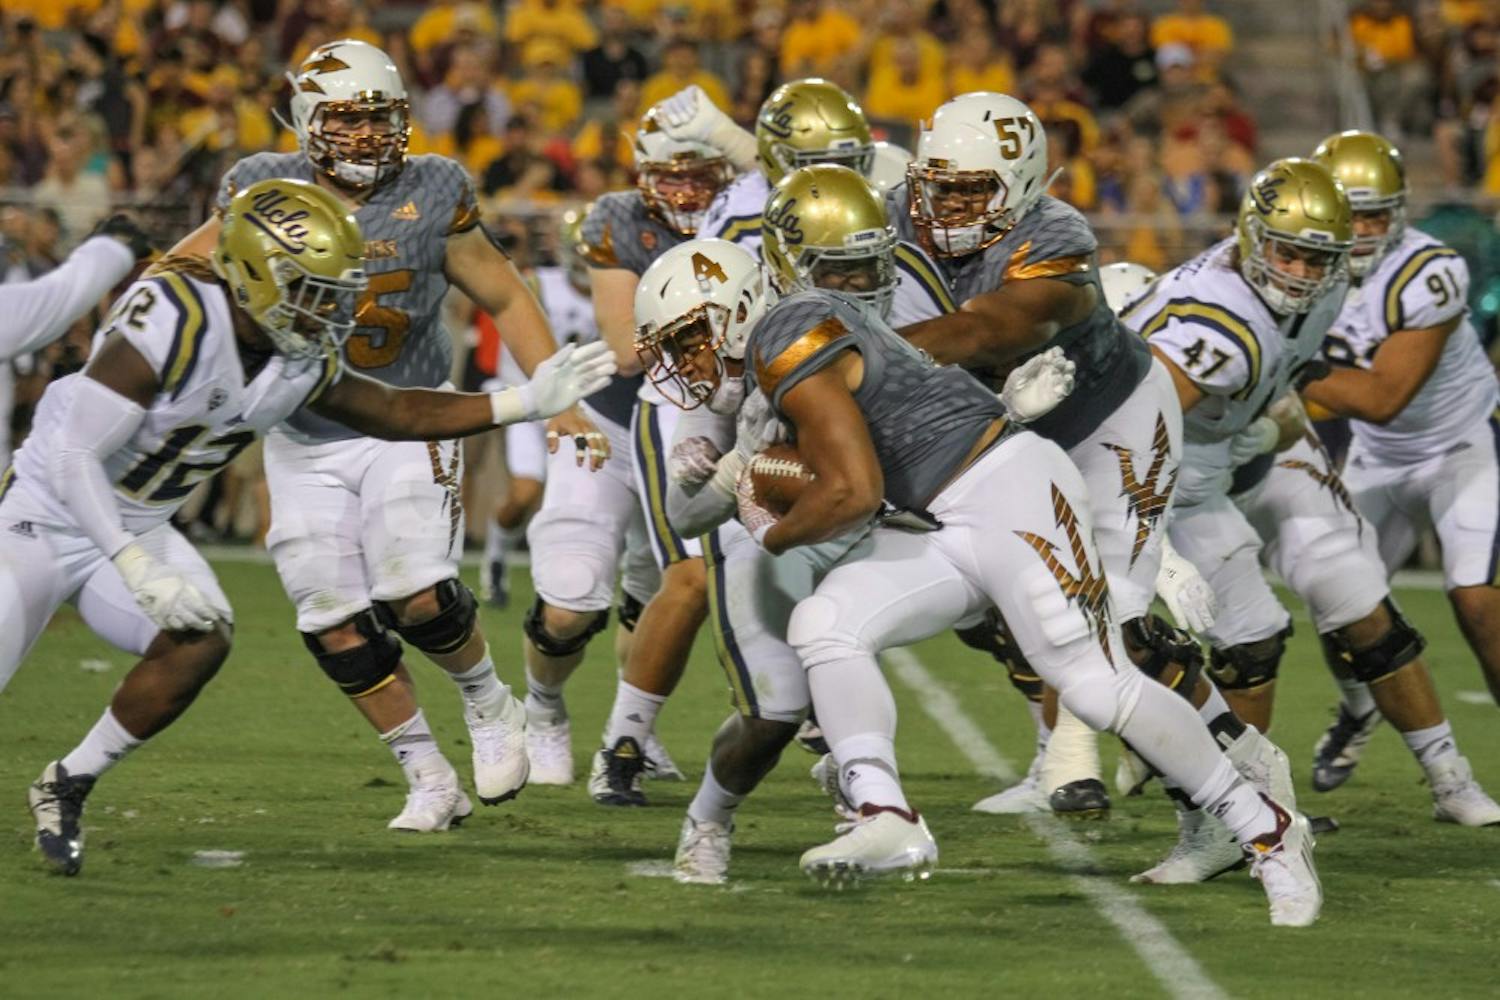 Demario Richard runs for a first down at the ASU Vs. UCLA footbal game on Oct. 8, 2016.